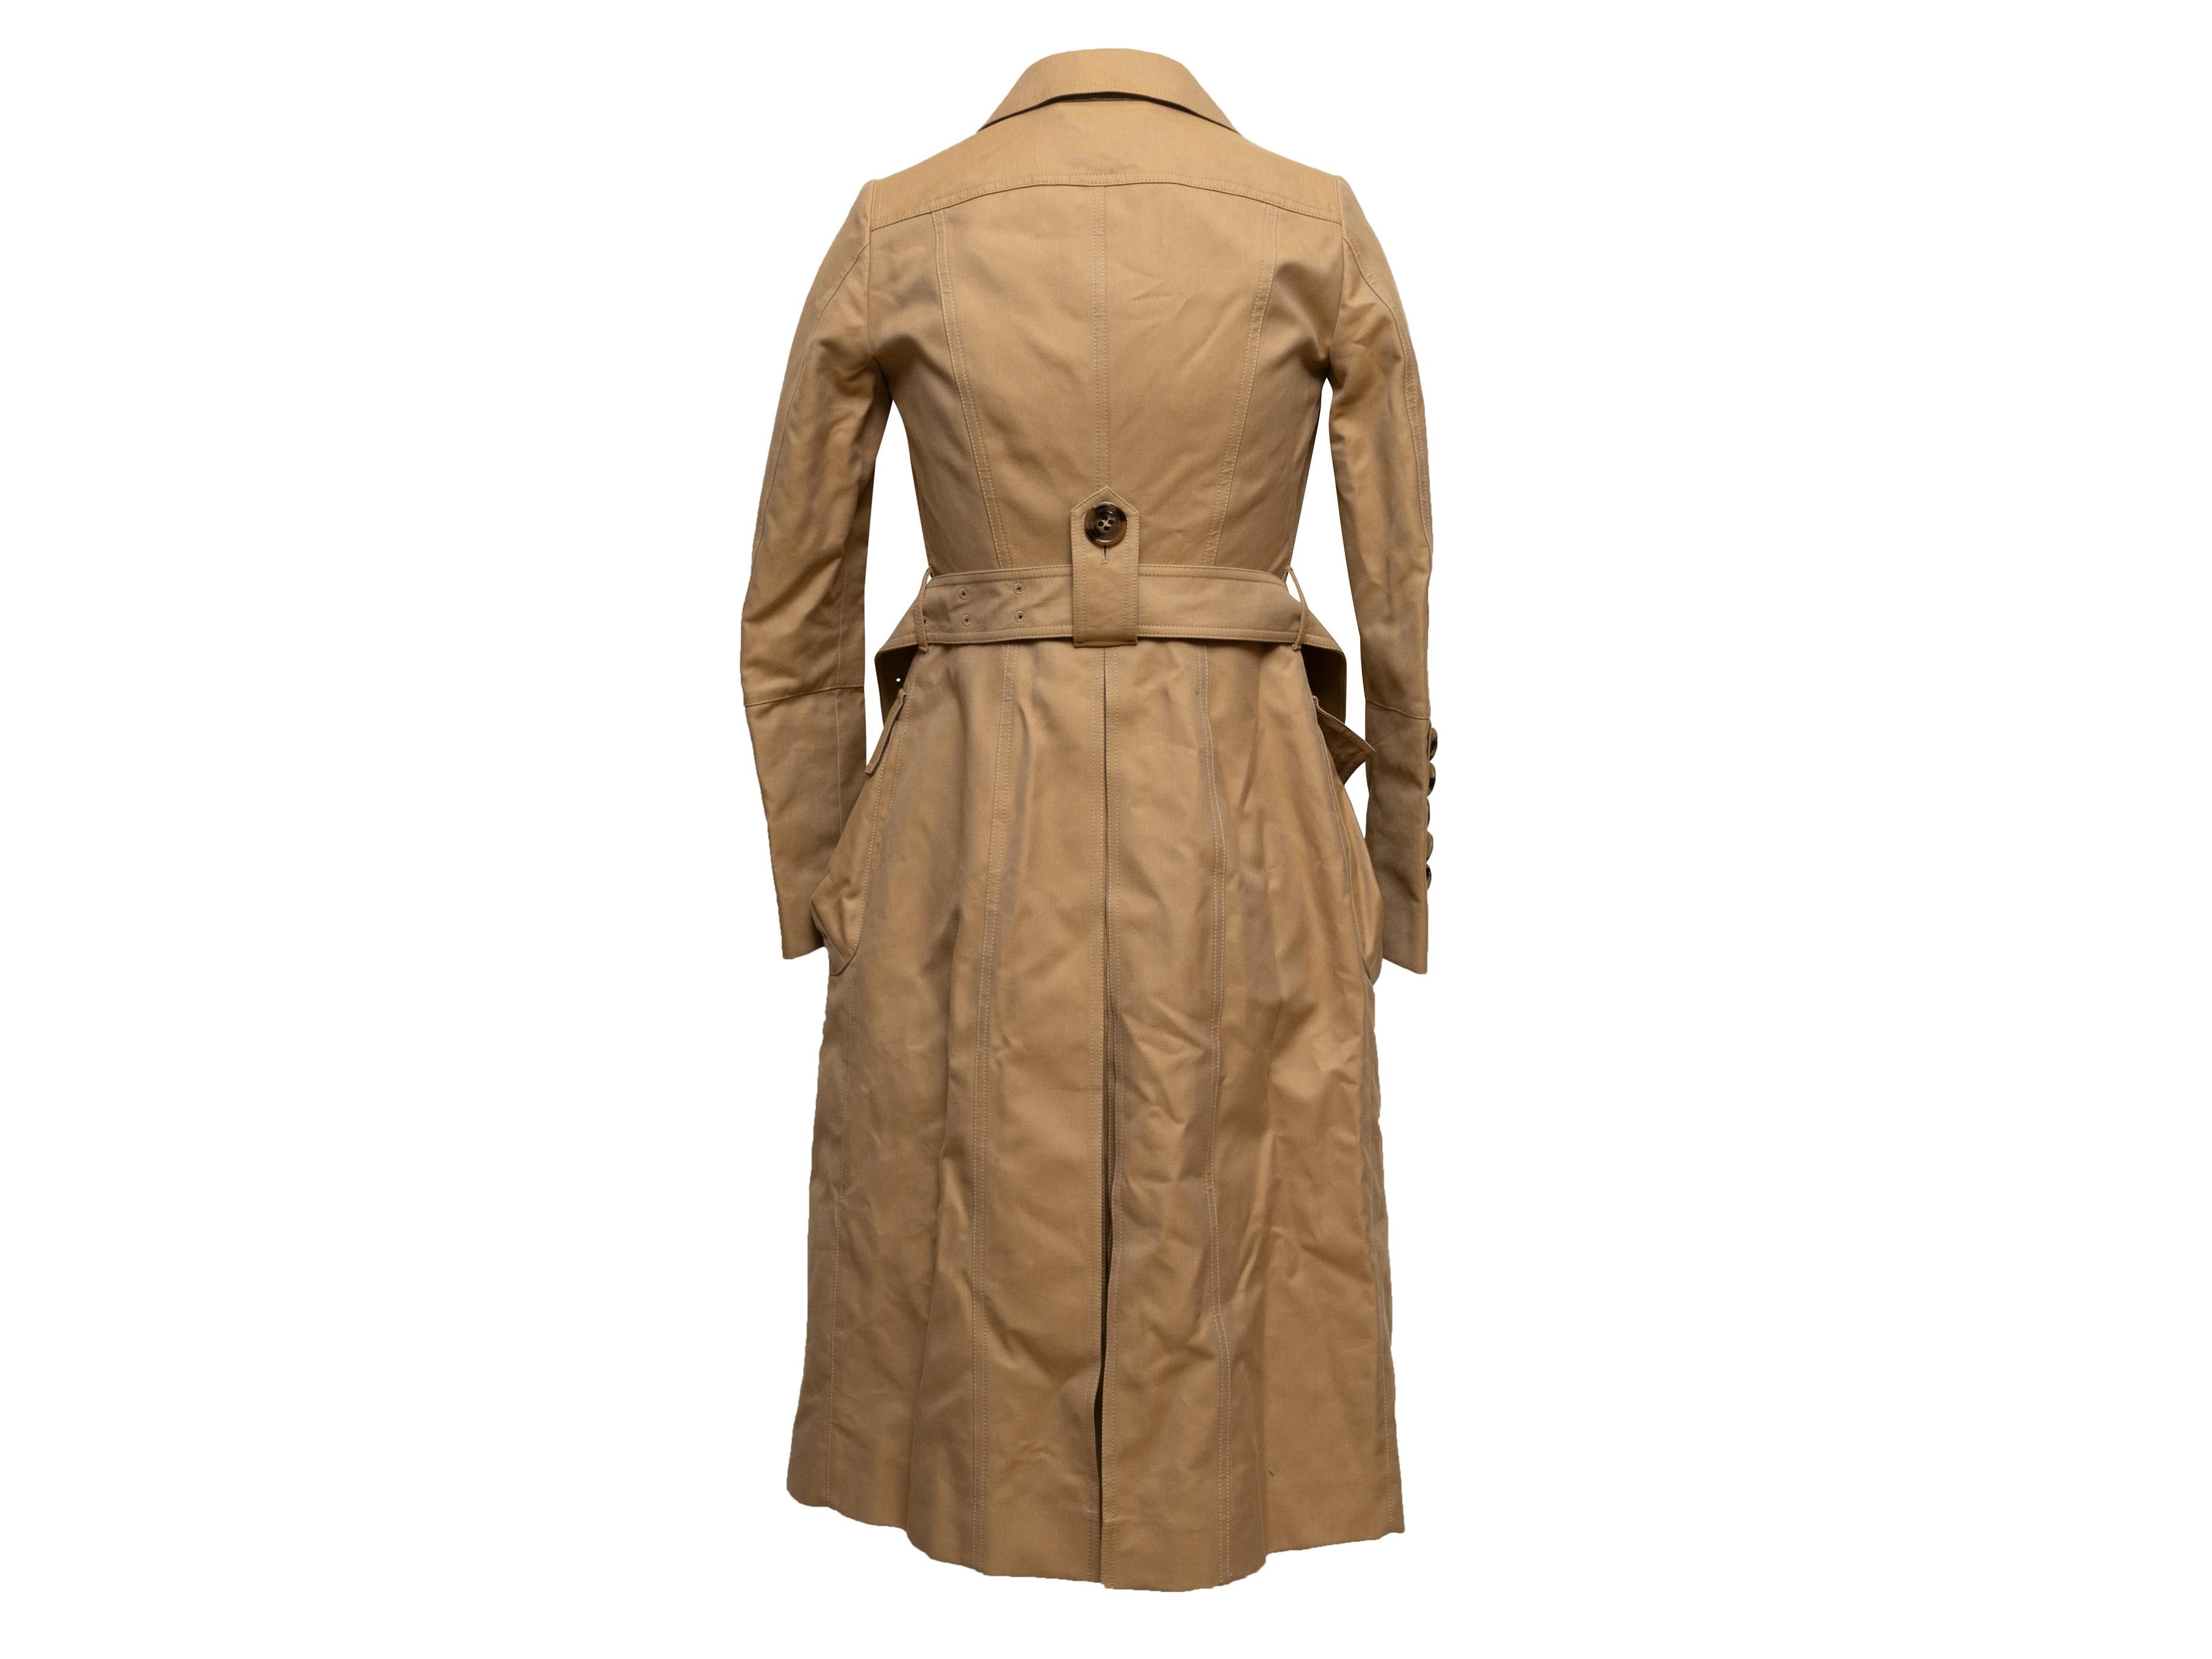 Tan Burberry Prorsum Belted Trench Coat Size EU 34 1